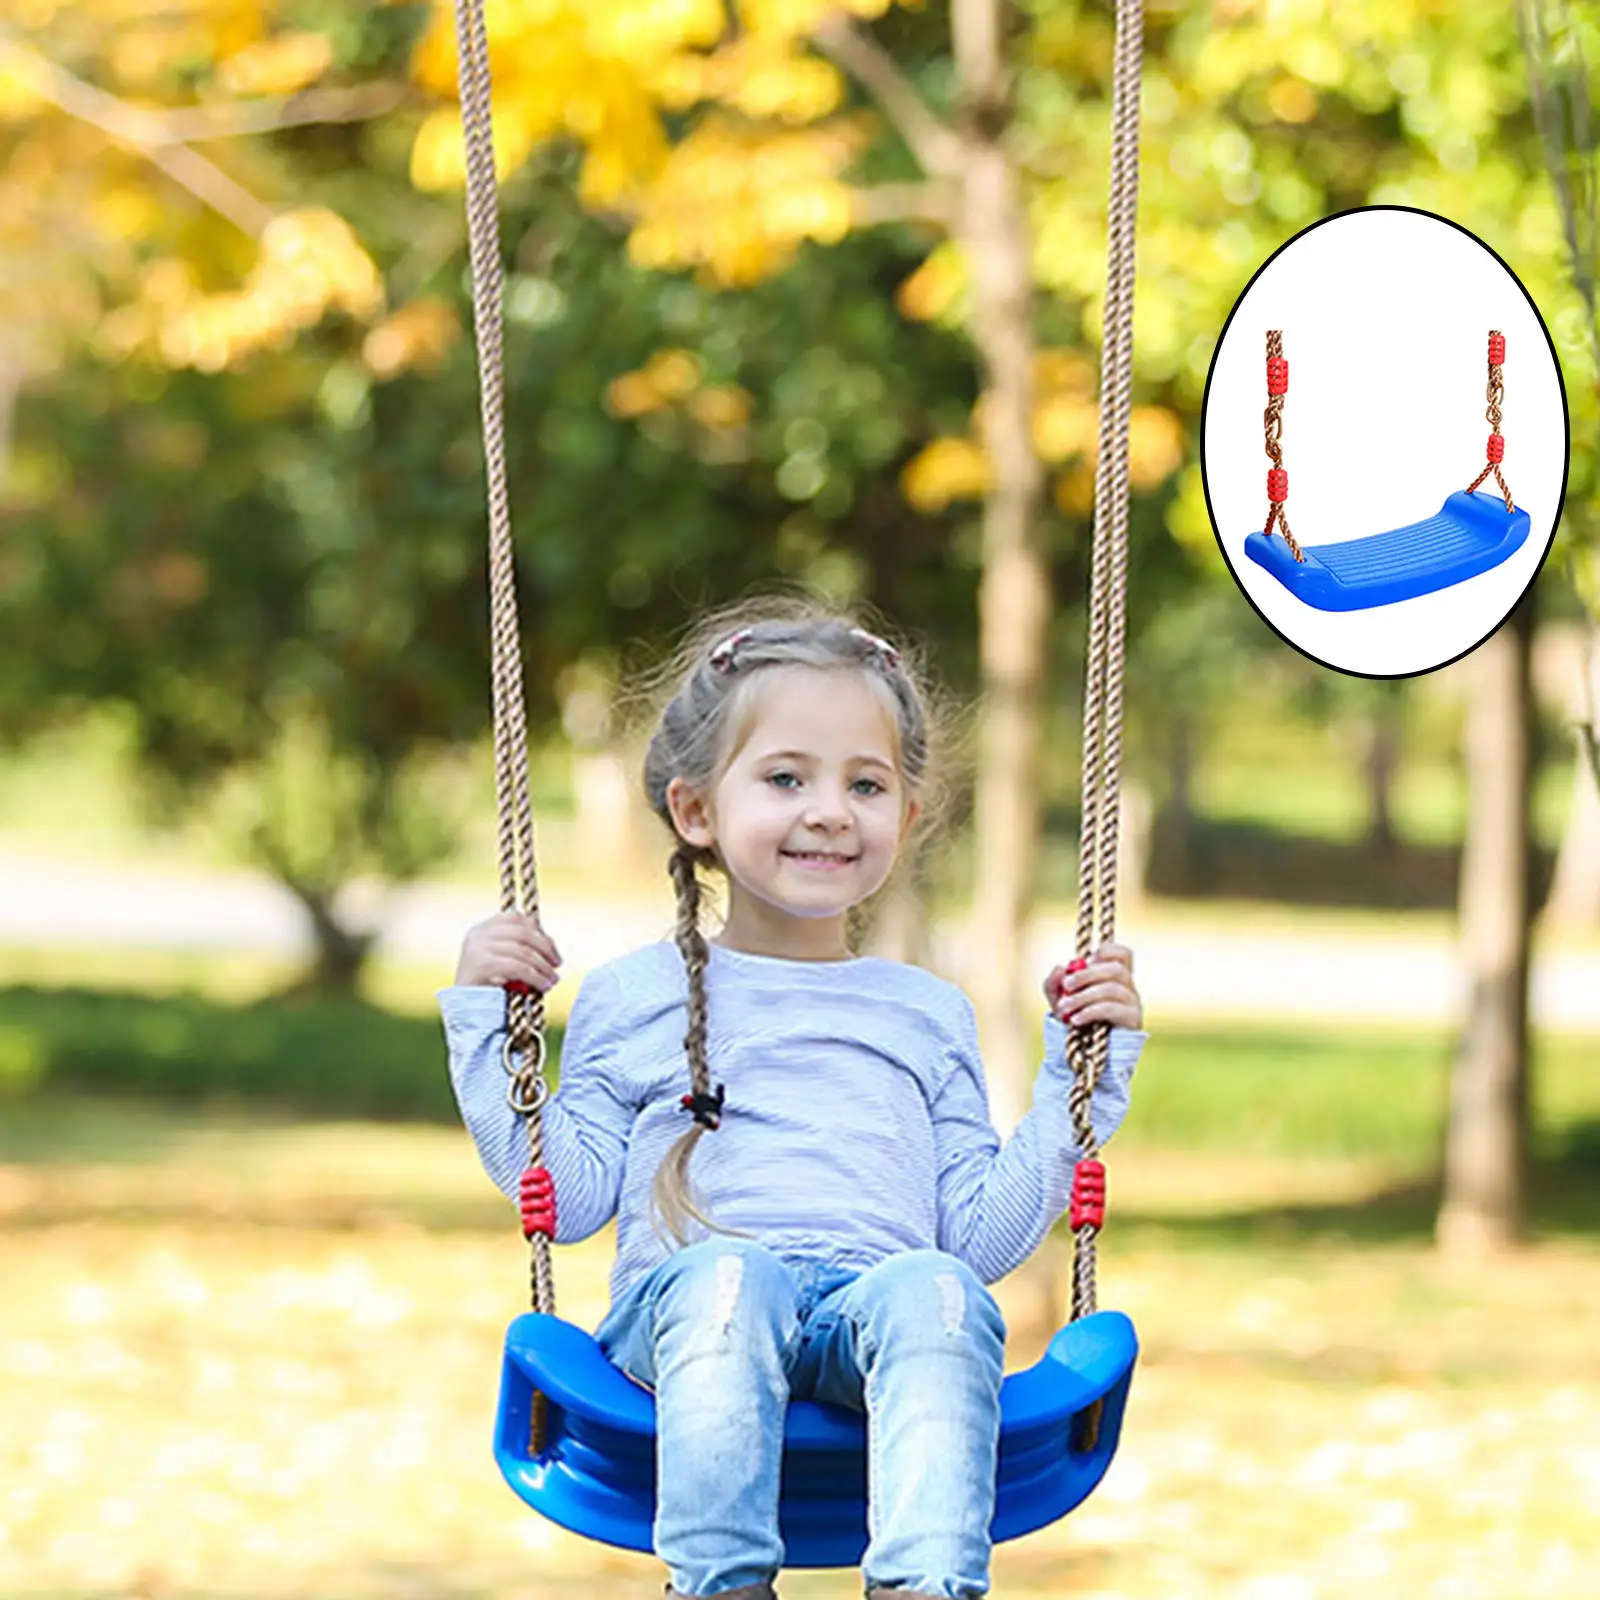 Swing Seat Set Rectangle 17x7inch Sit On Board Swing Flying Toy for Playground Accessories Backyard Jungle Garden Children|Toy Swings| - AliExpress